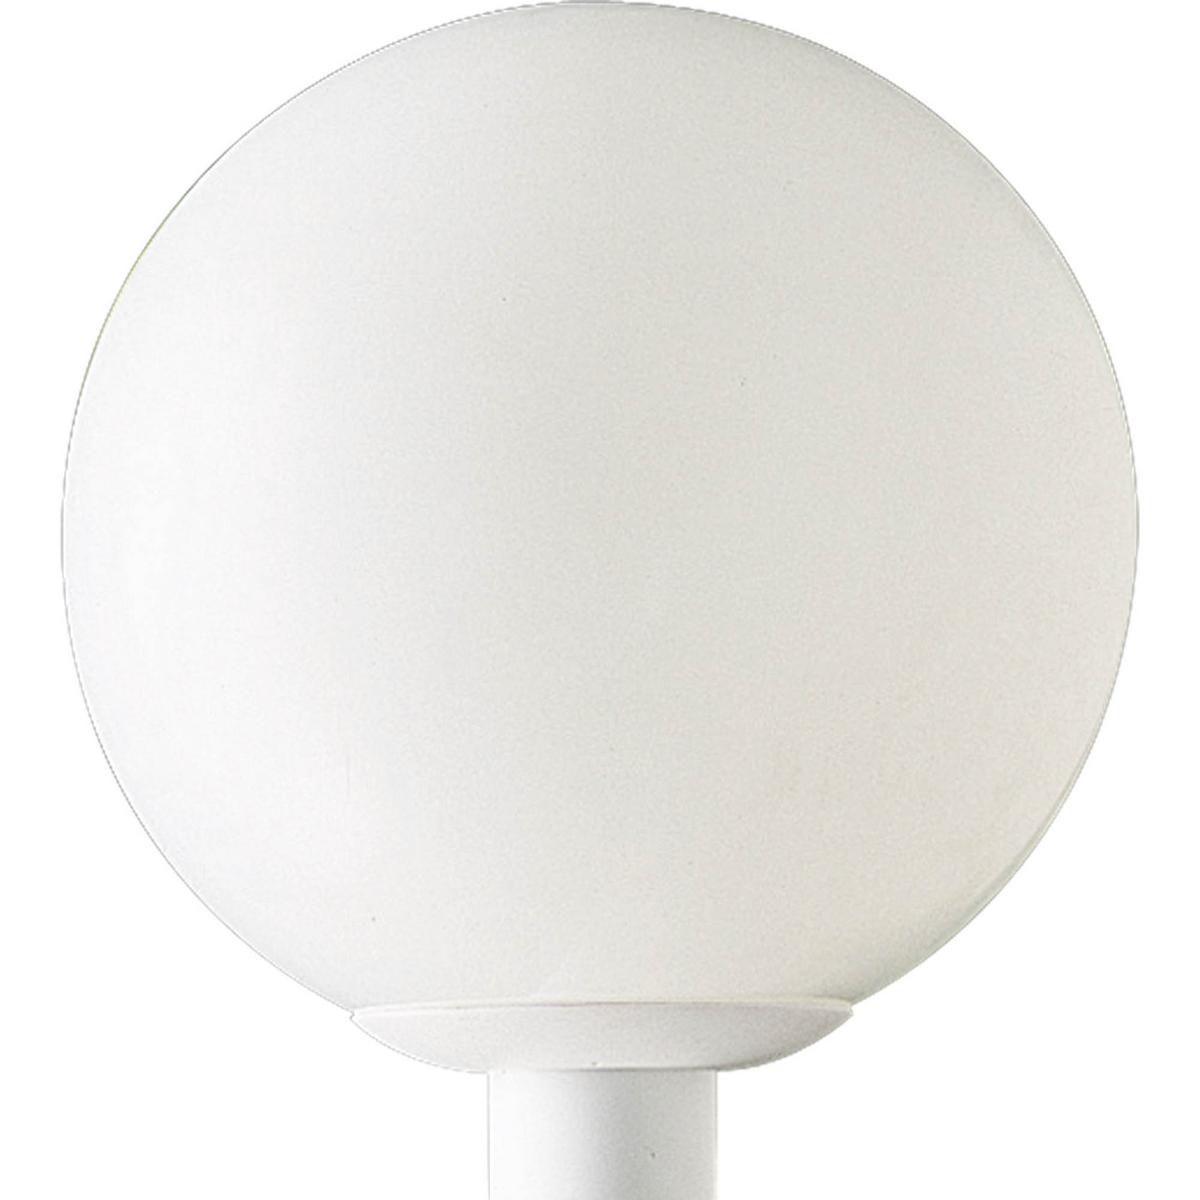 Hubbell P5426-60 12 inch post lantern featuring a white shatter-resistant acrylic globe and a white fitter.  ; White shatter-resistant acrylic globe. ; Complete post lantern. ; Ideal for outdoor use.